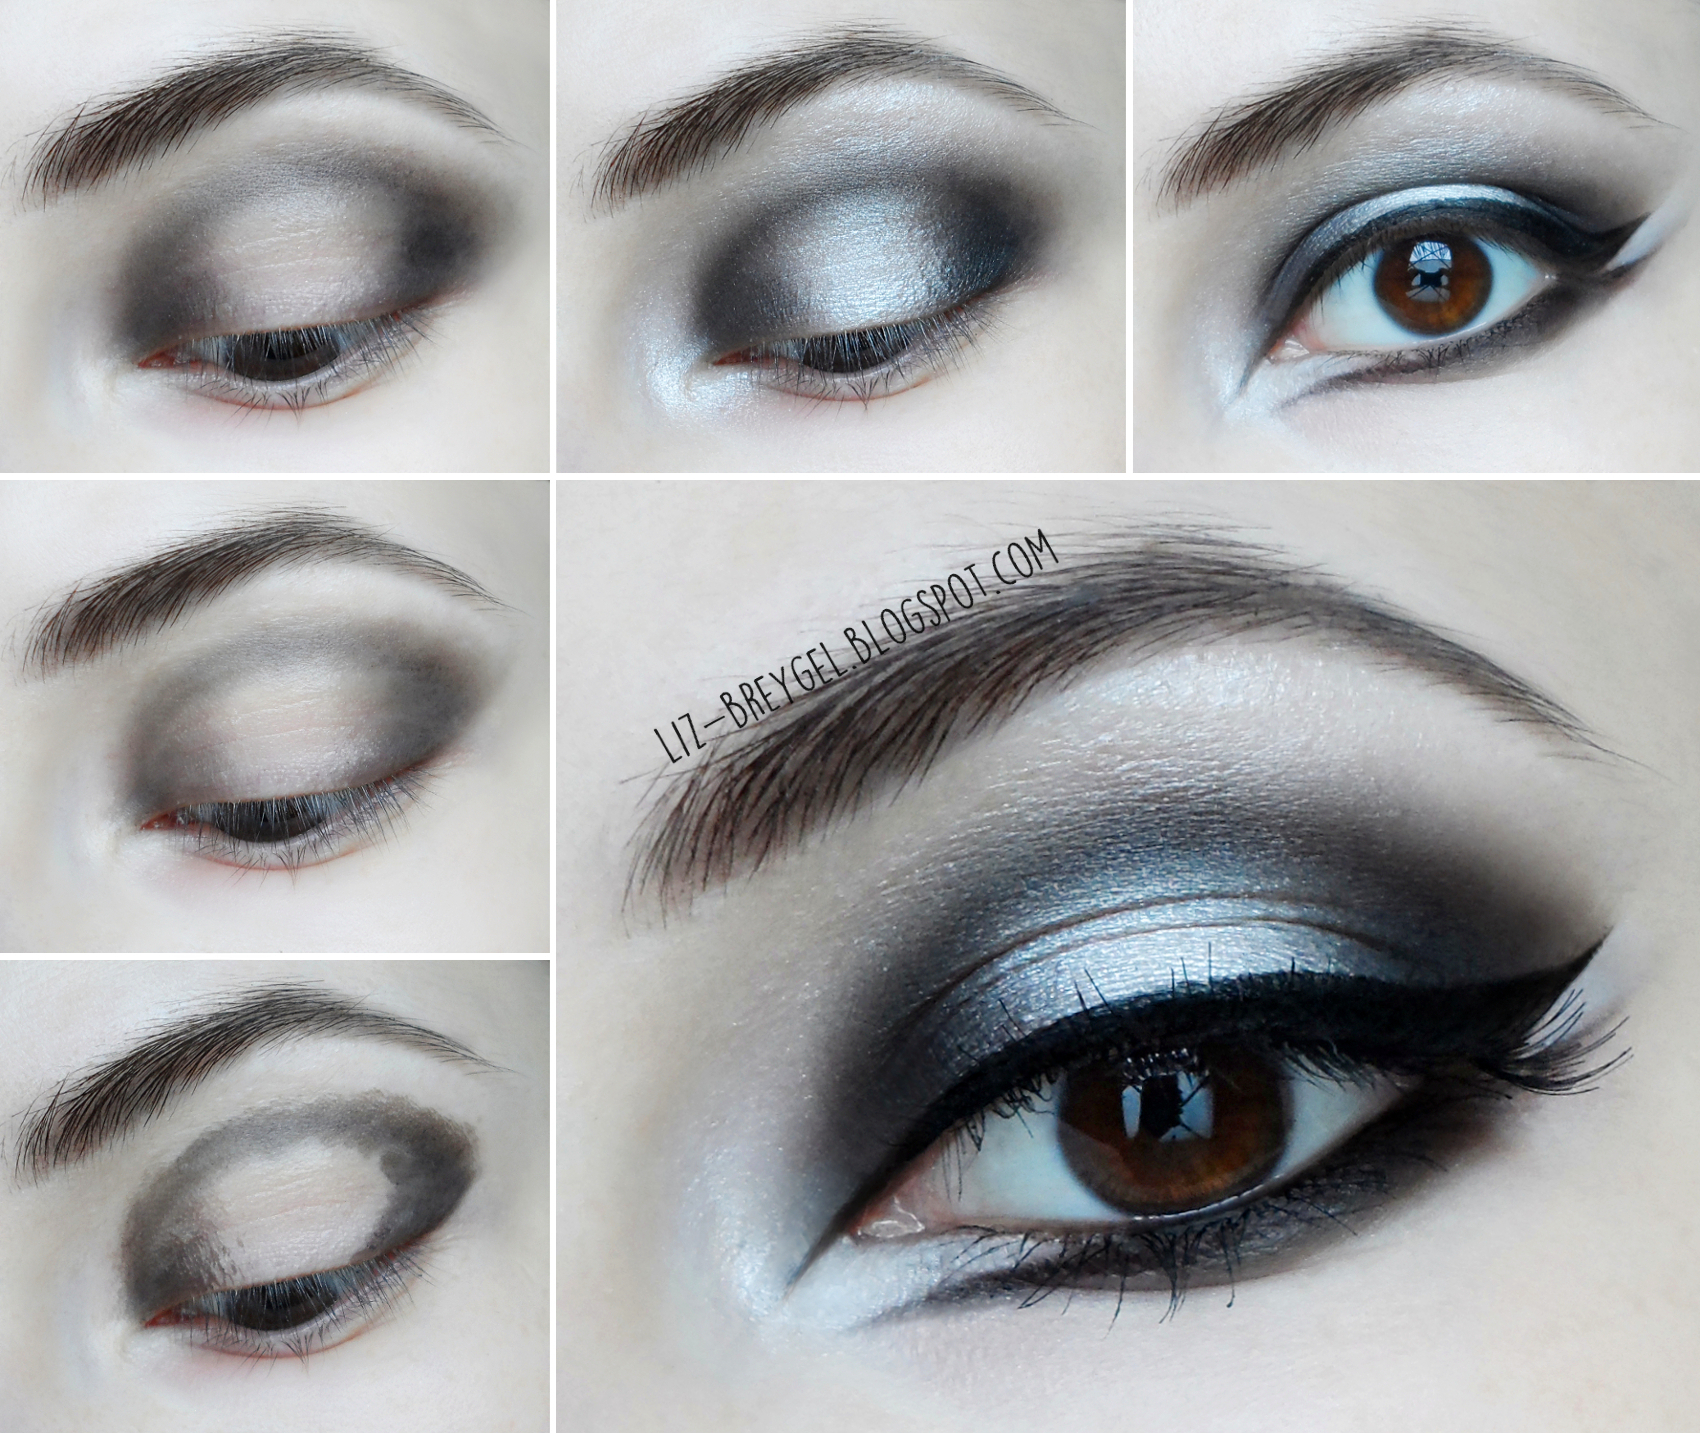 a close-up picture of an eye with dramatic Gothic makeup look